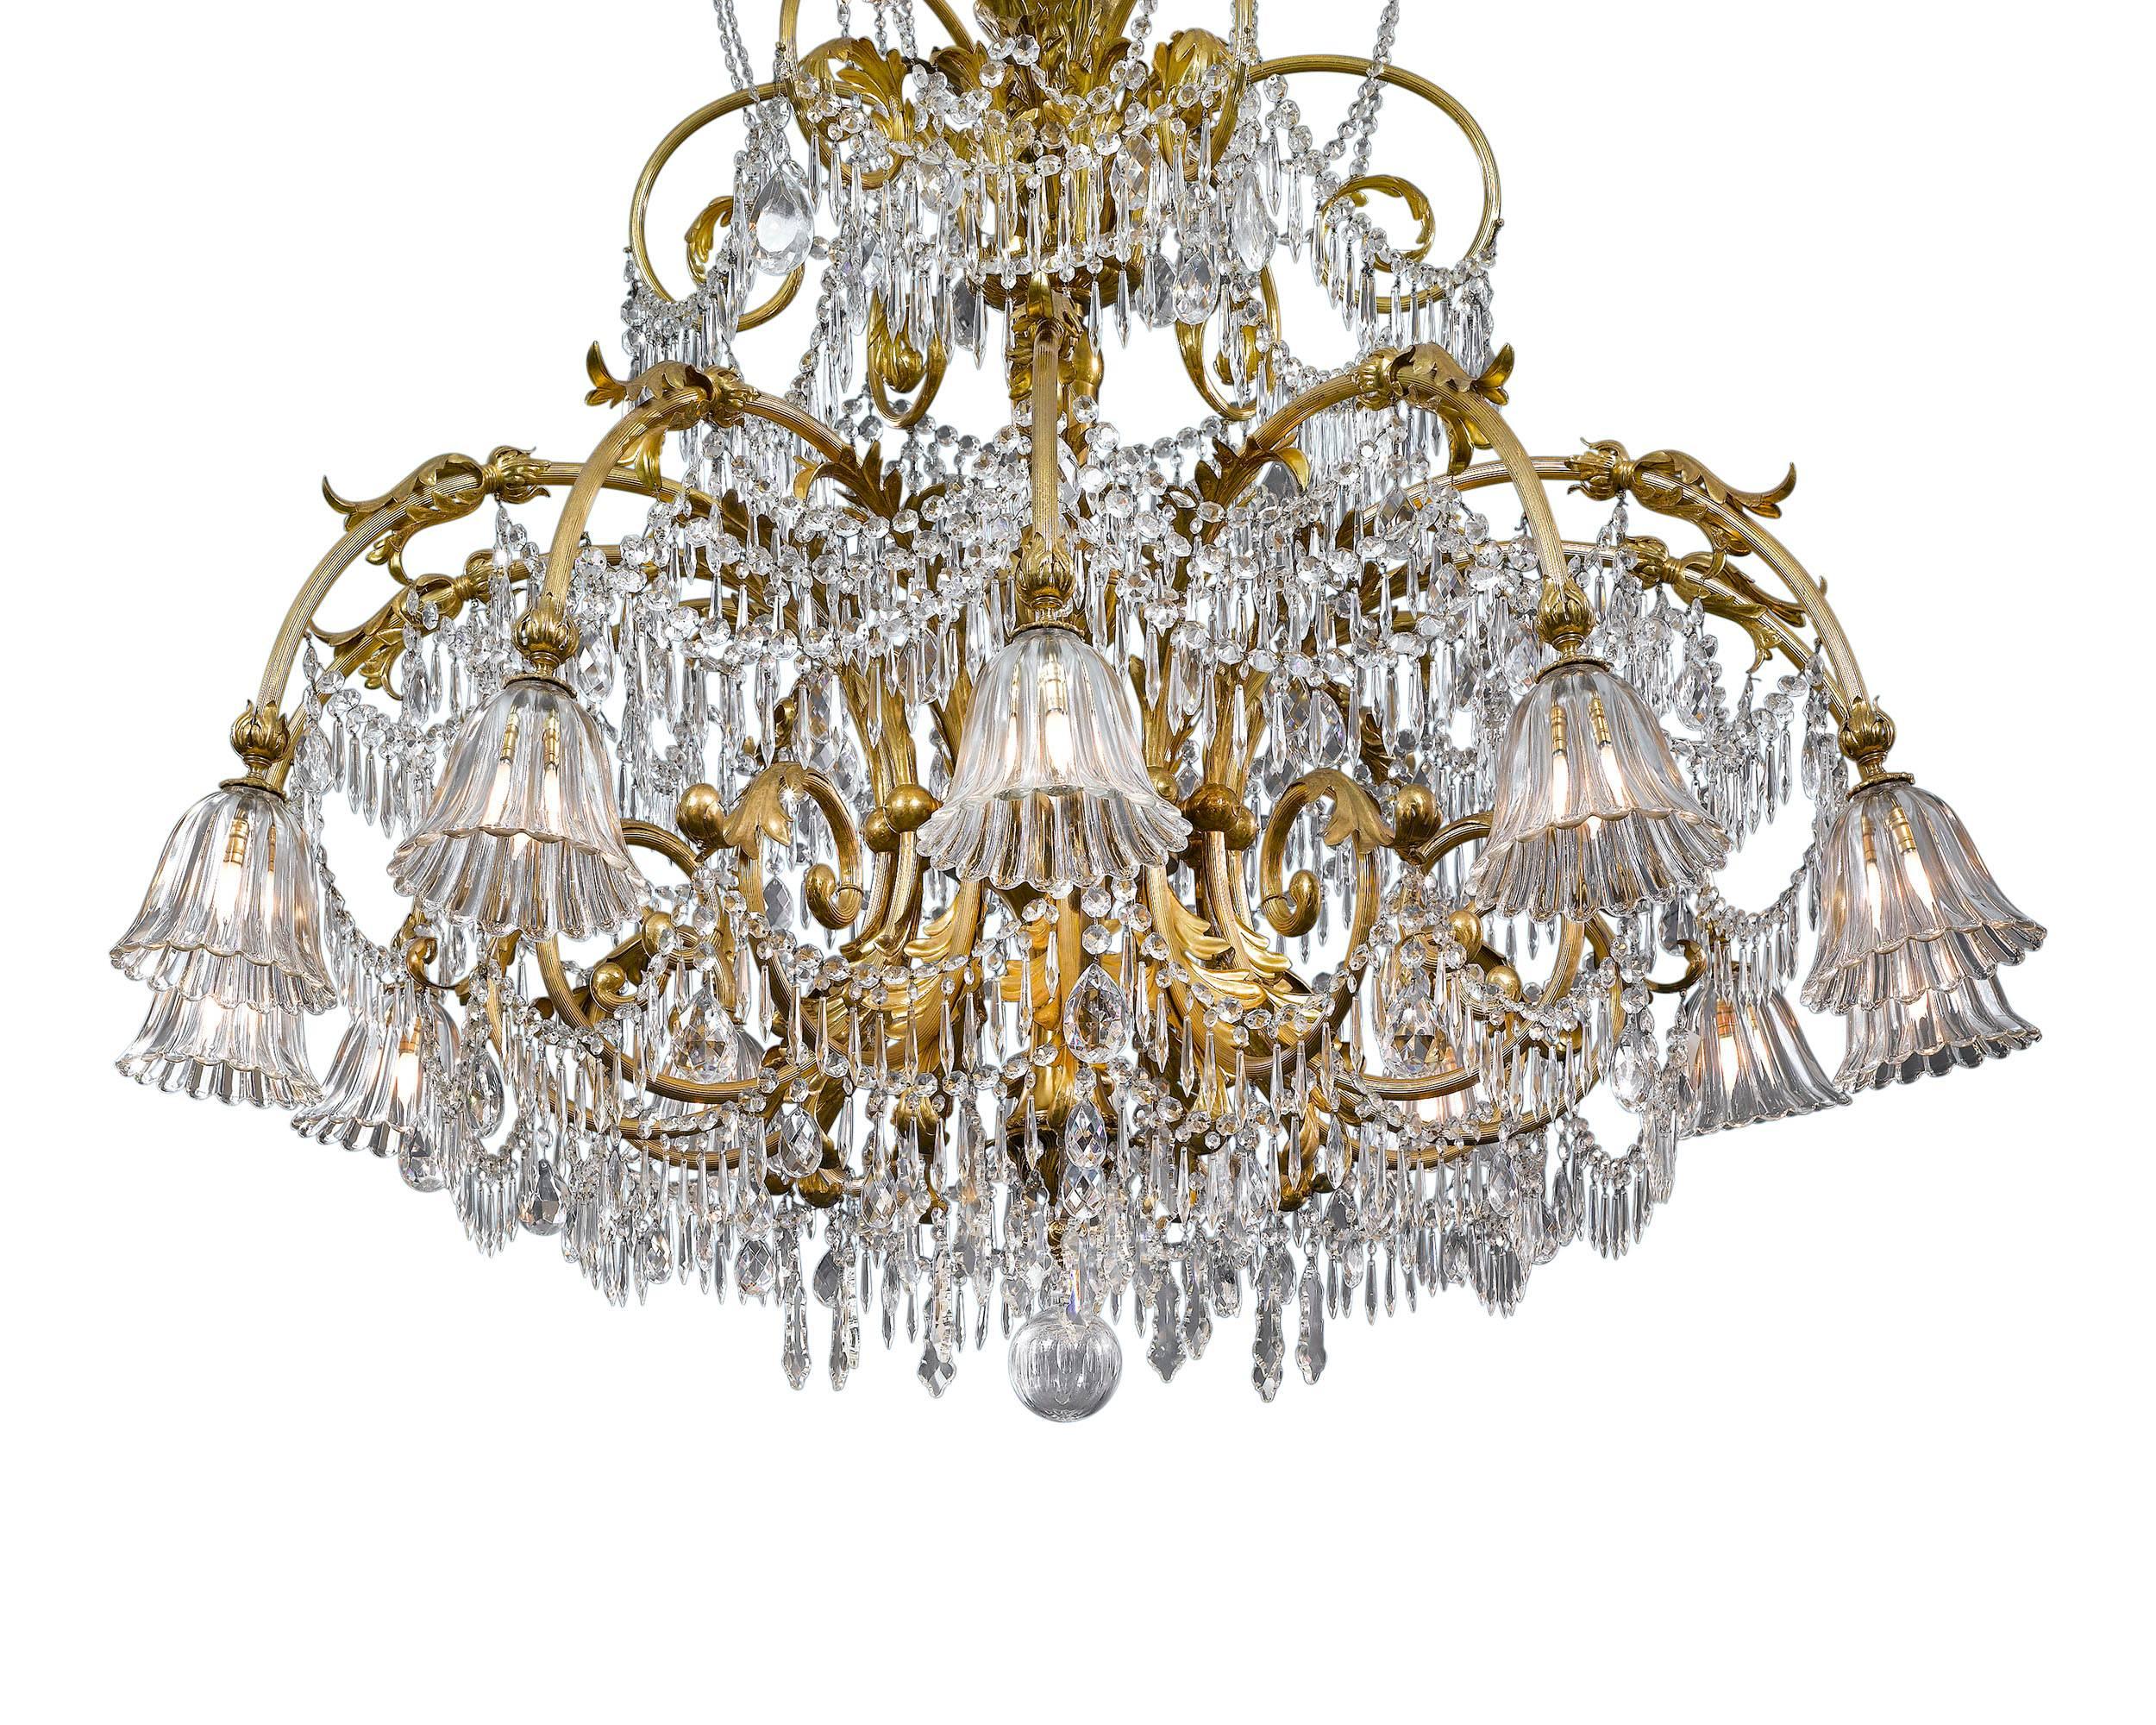 An extraordinary and monumentally-sized Art Deco period chandelier beautifully designed with dazzling Baccarat crystal hanging from scrolling brass branches. This incredible eighteen-light fixture is of exceptional quality and size, boasting some of